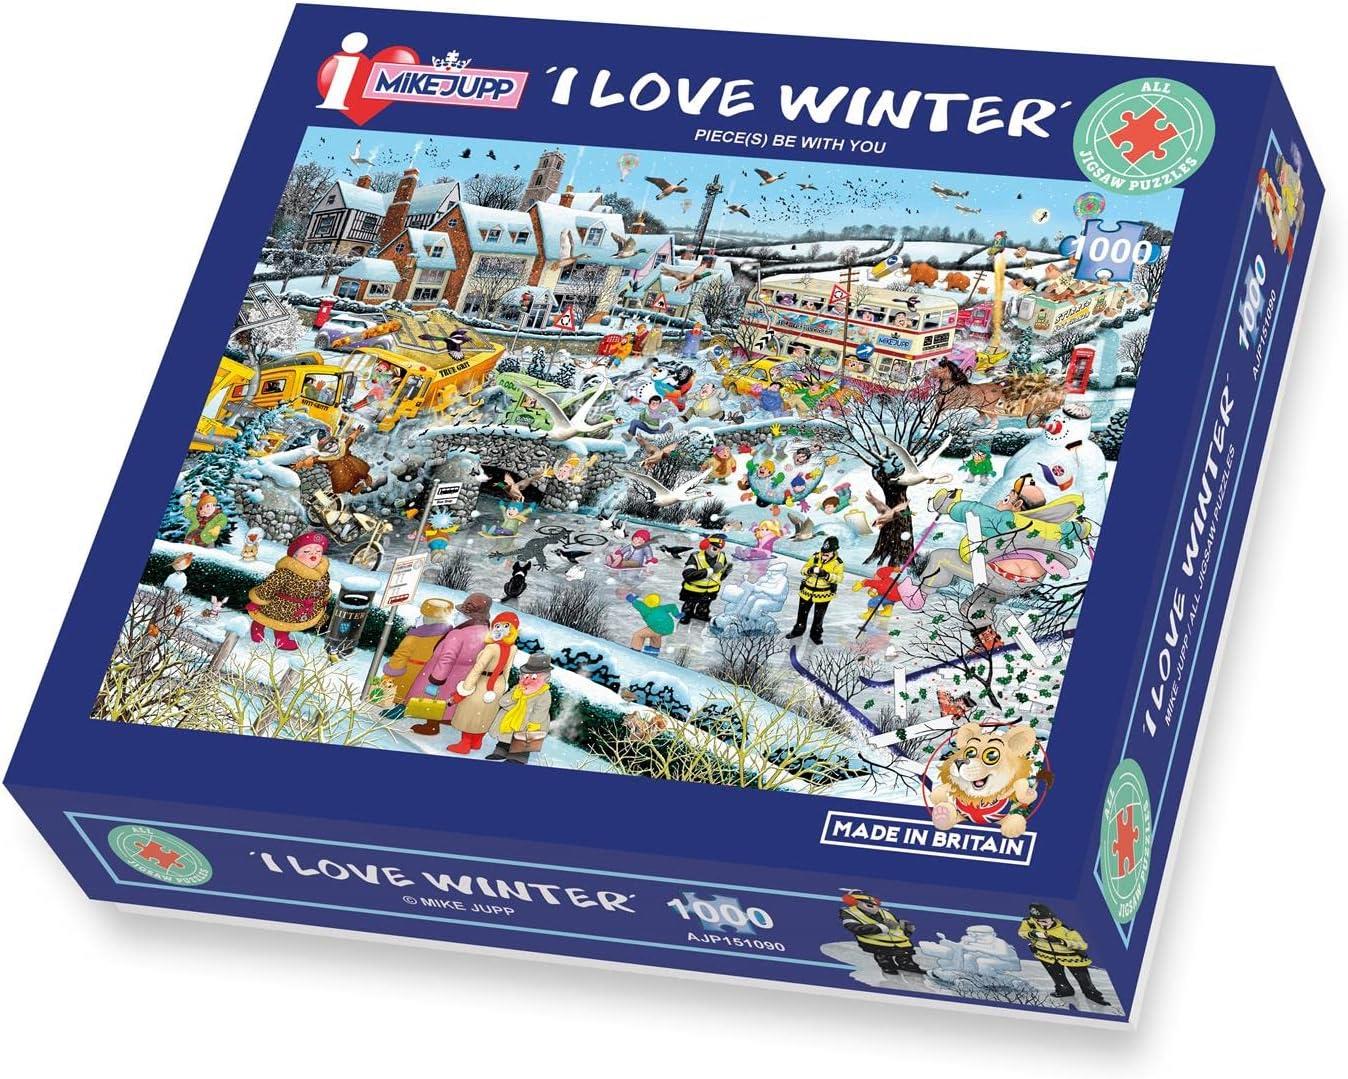 I Love Winter, Mike Jupp Jigsaw Puzzle (1000 Pieces)